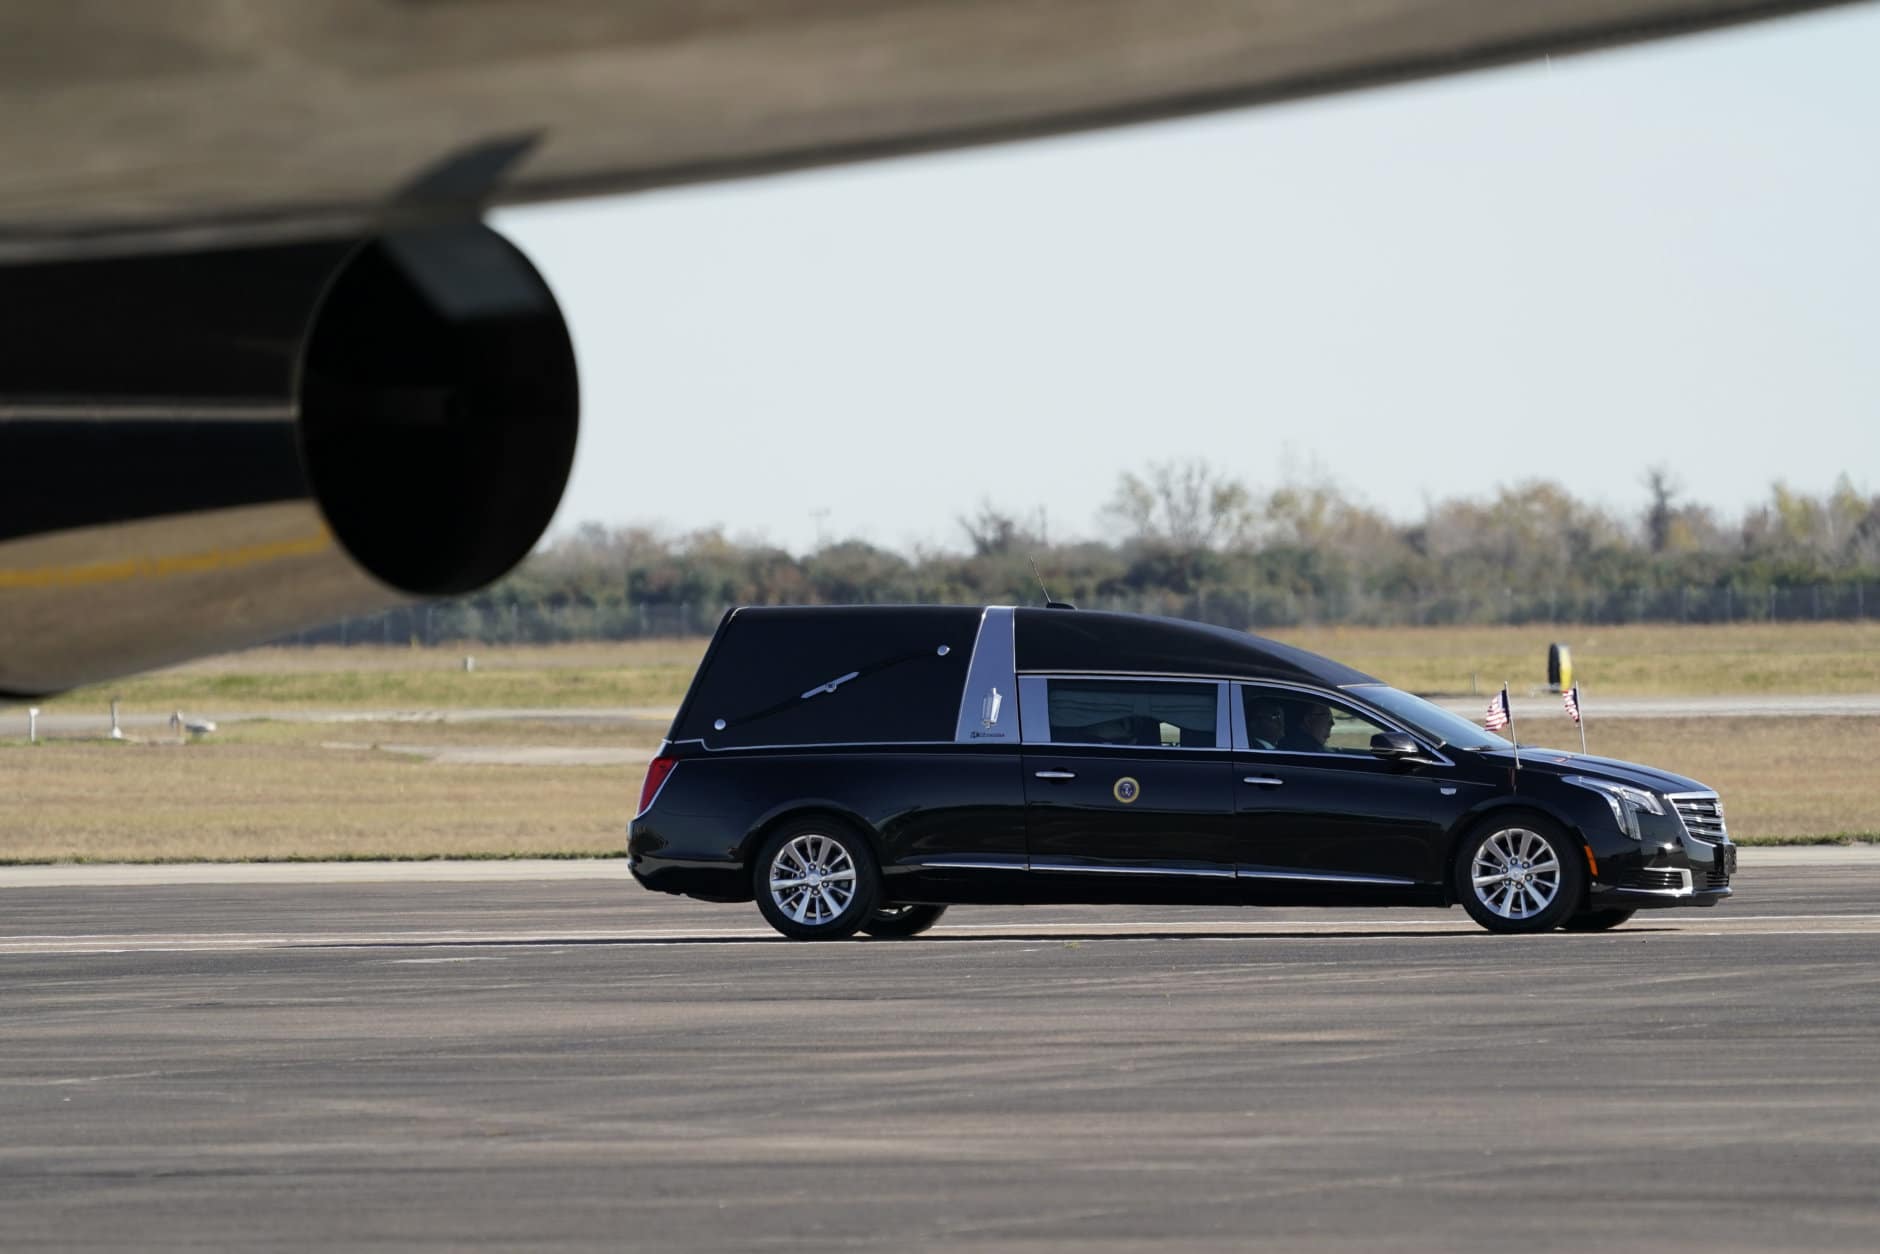 The hearse carrying the flag-draped casket of former President George H.W. Bush arrives at Ellington Field for a departure ceremony Monday, Dec. 3, 2018, in Houston. (AP Photo/David J. Phillip, Pool)